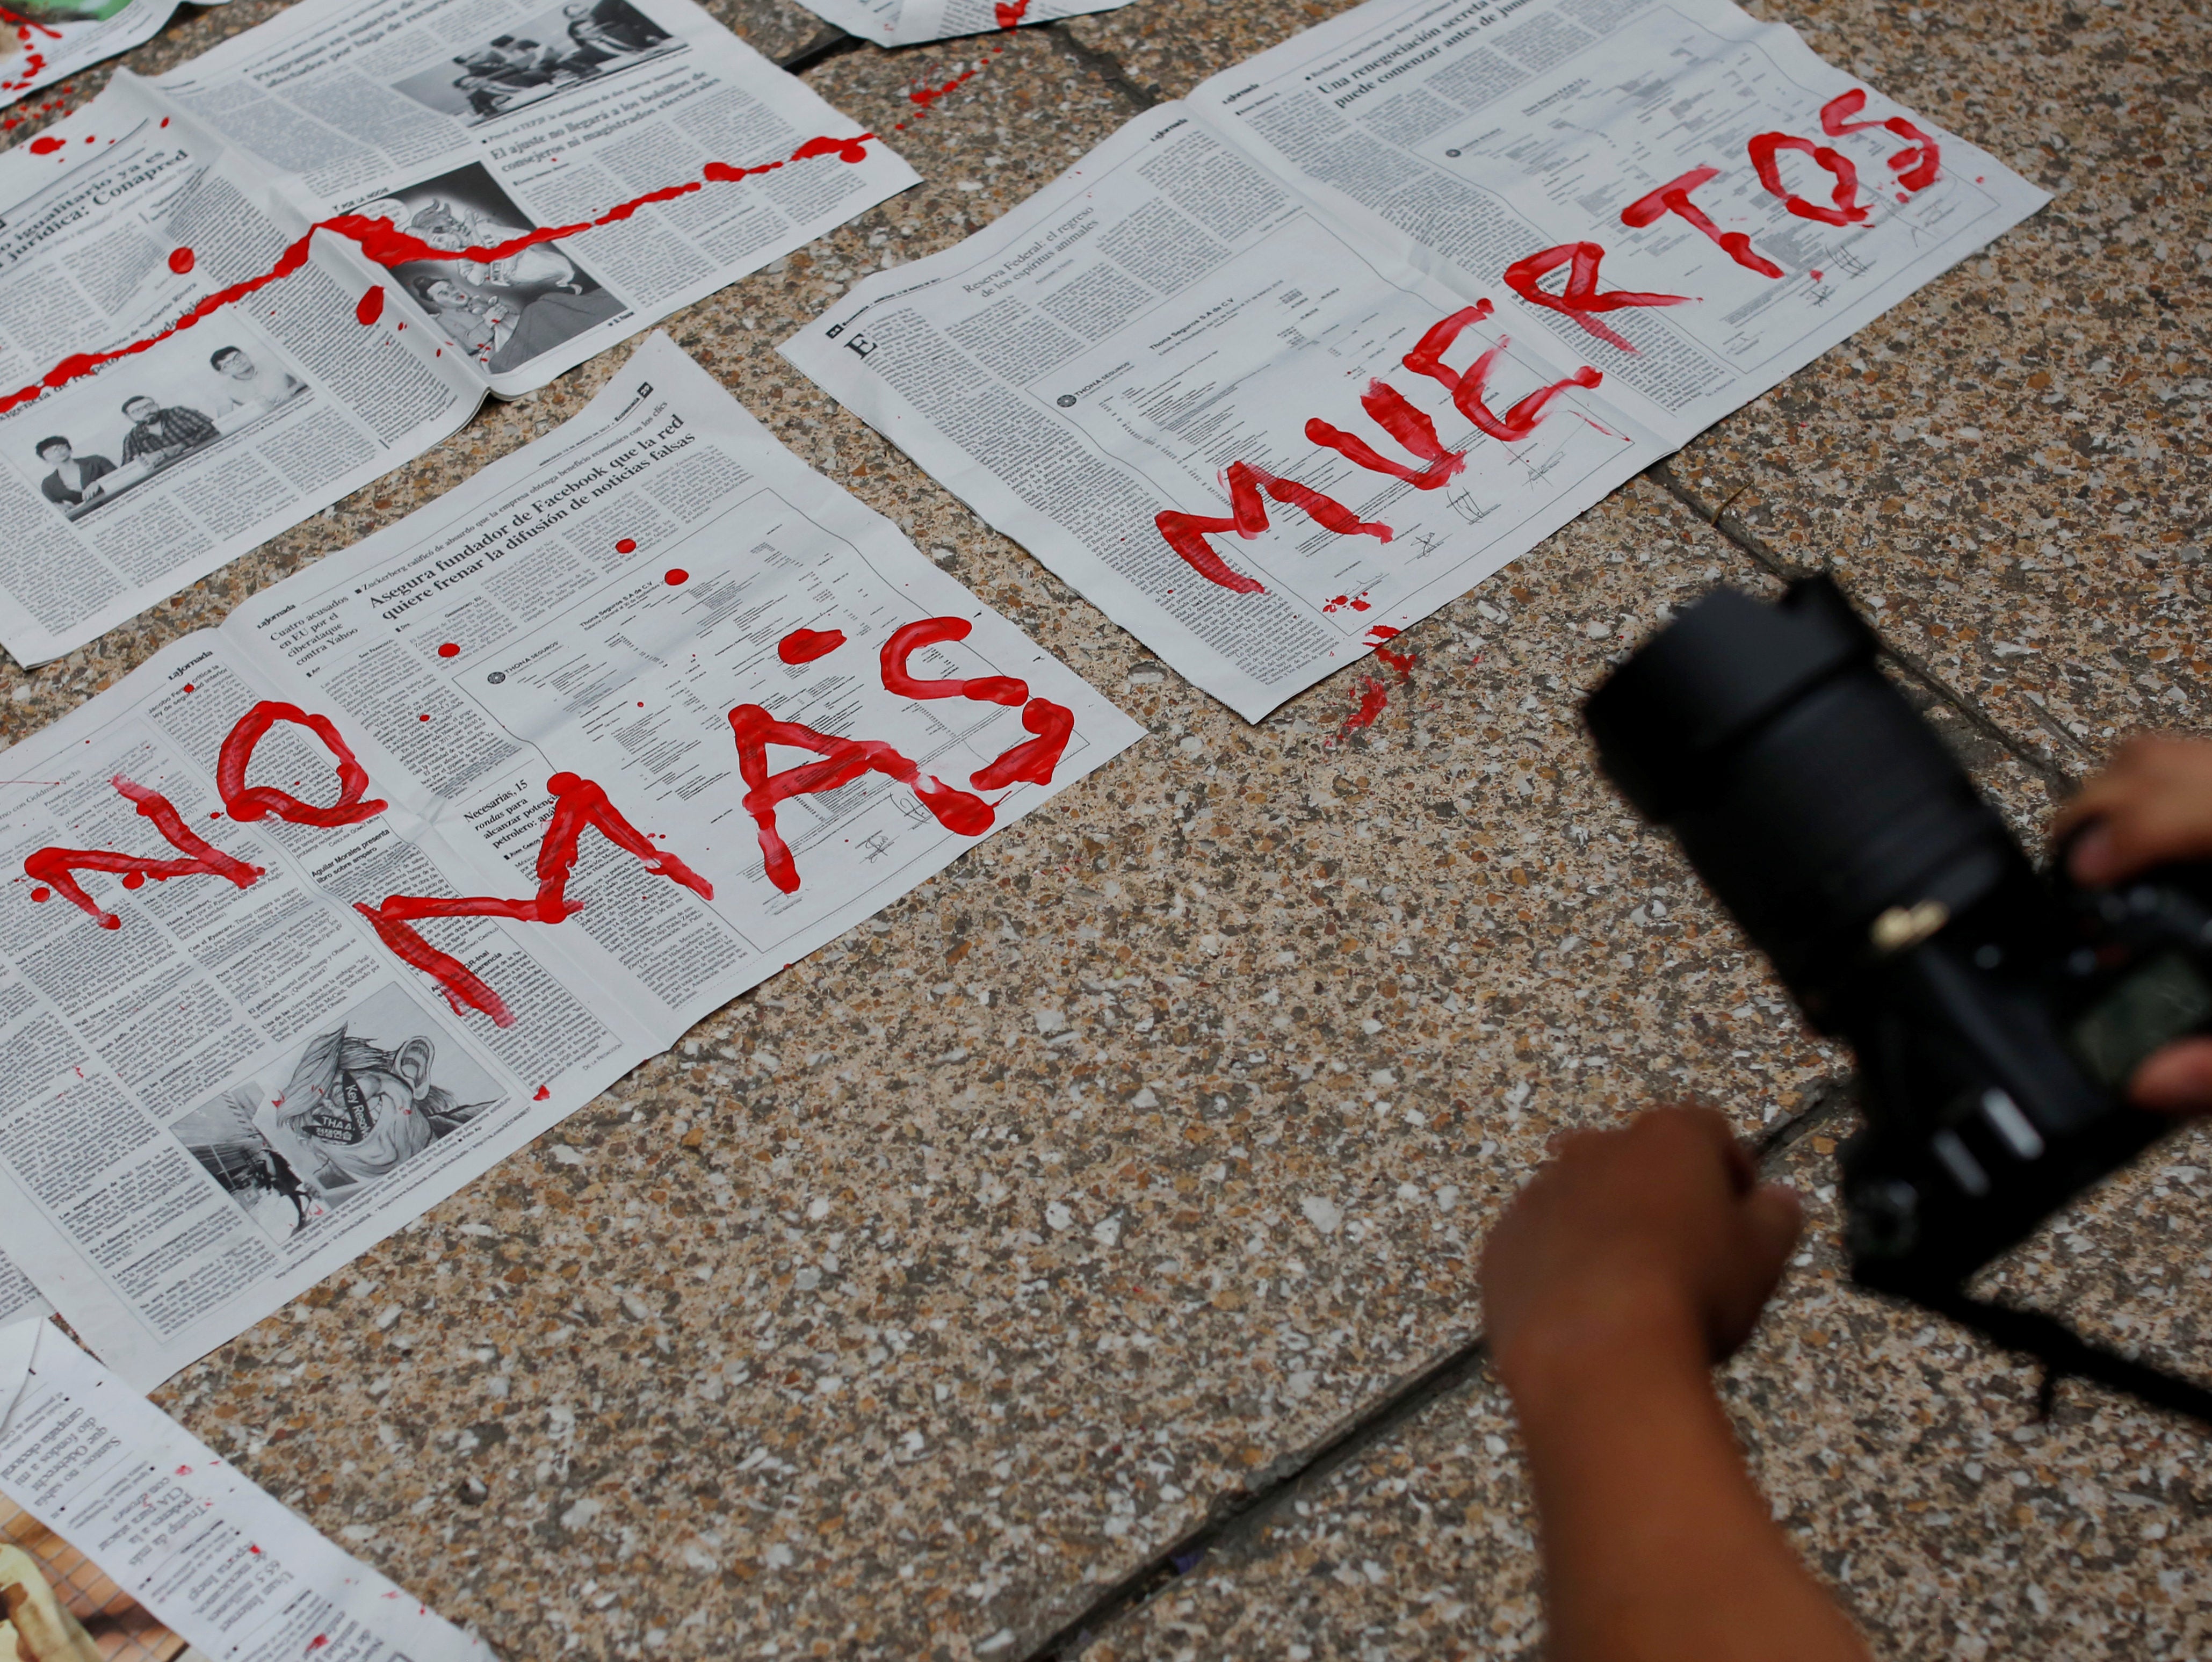 Mexican news photographer found dead day after wife alleges he was abducted by police at gunpoint